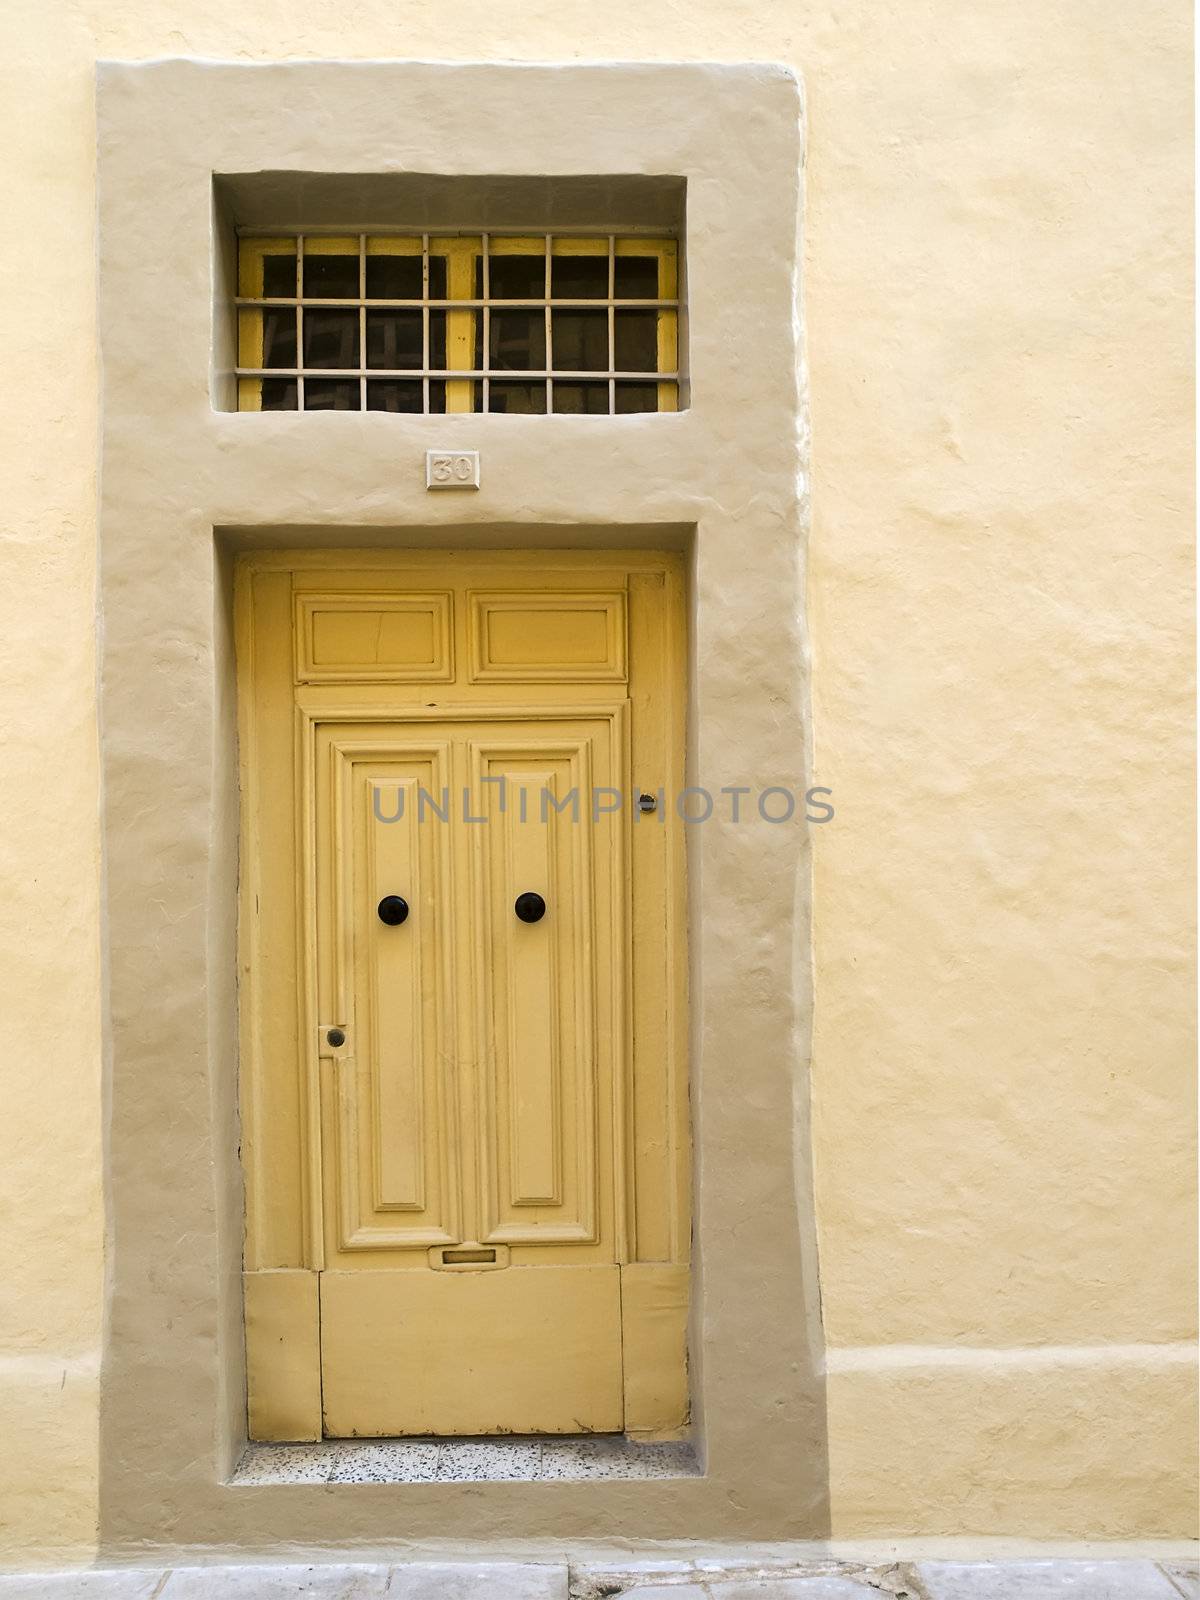 A weird single panel door in Mdina fabricated in such a way as to resemble the traditional double pane Malta door